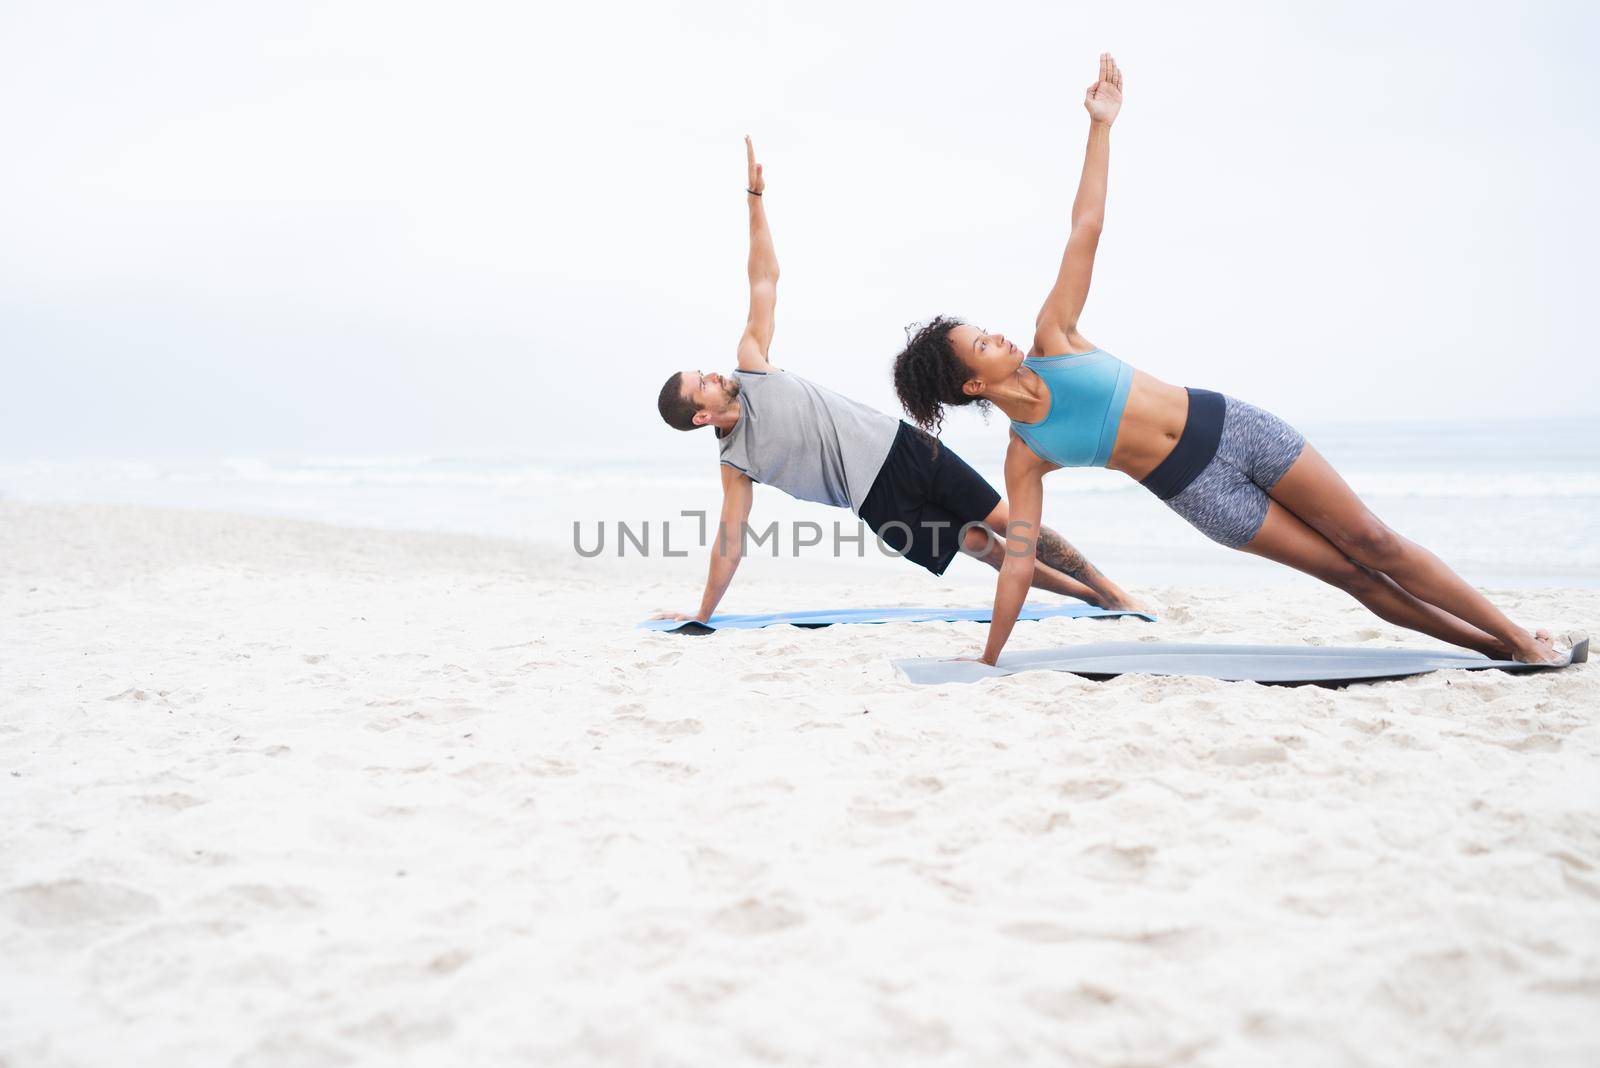 Leading a more active lifestyle together. a young man and woman practising yoga together at the beach. by YuriArcurs